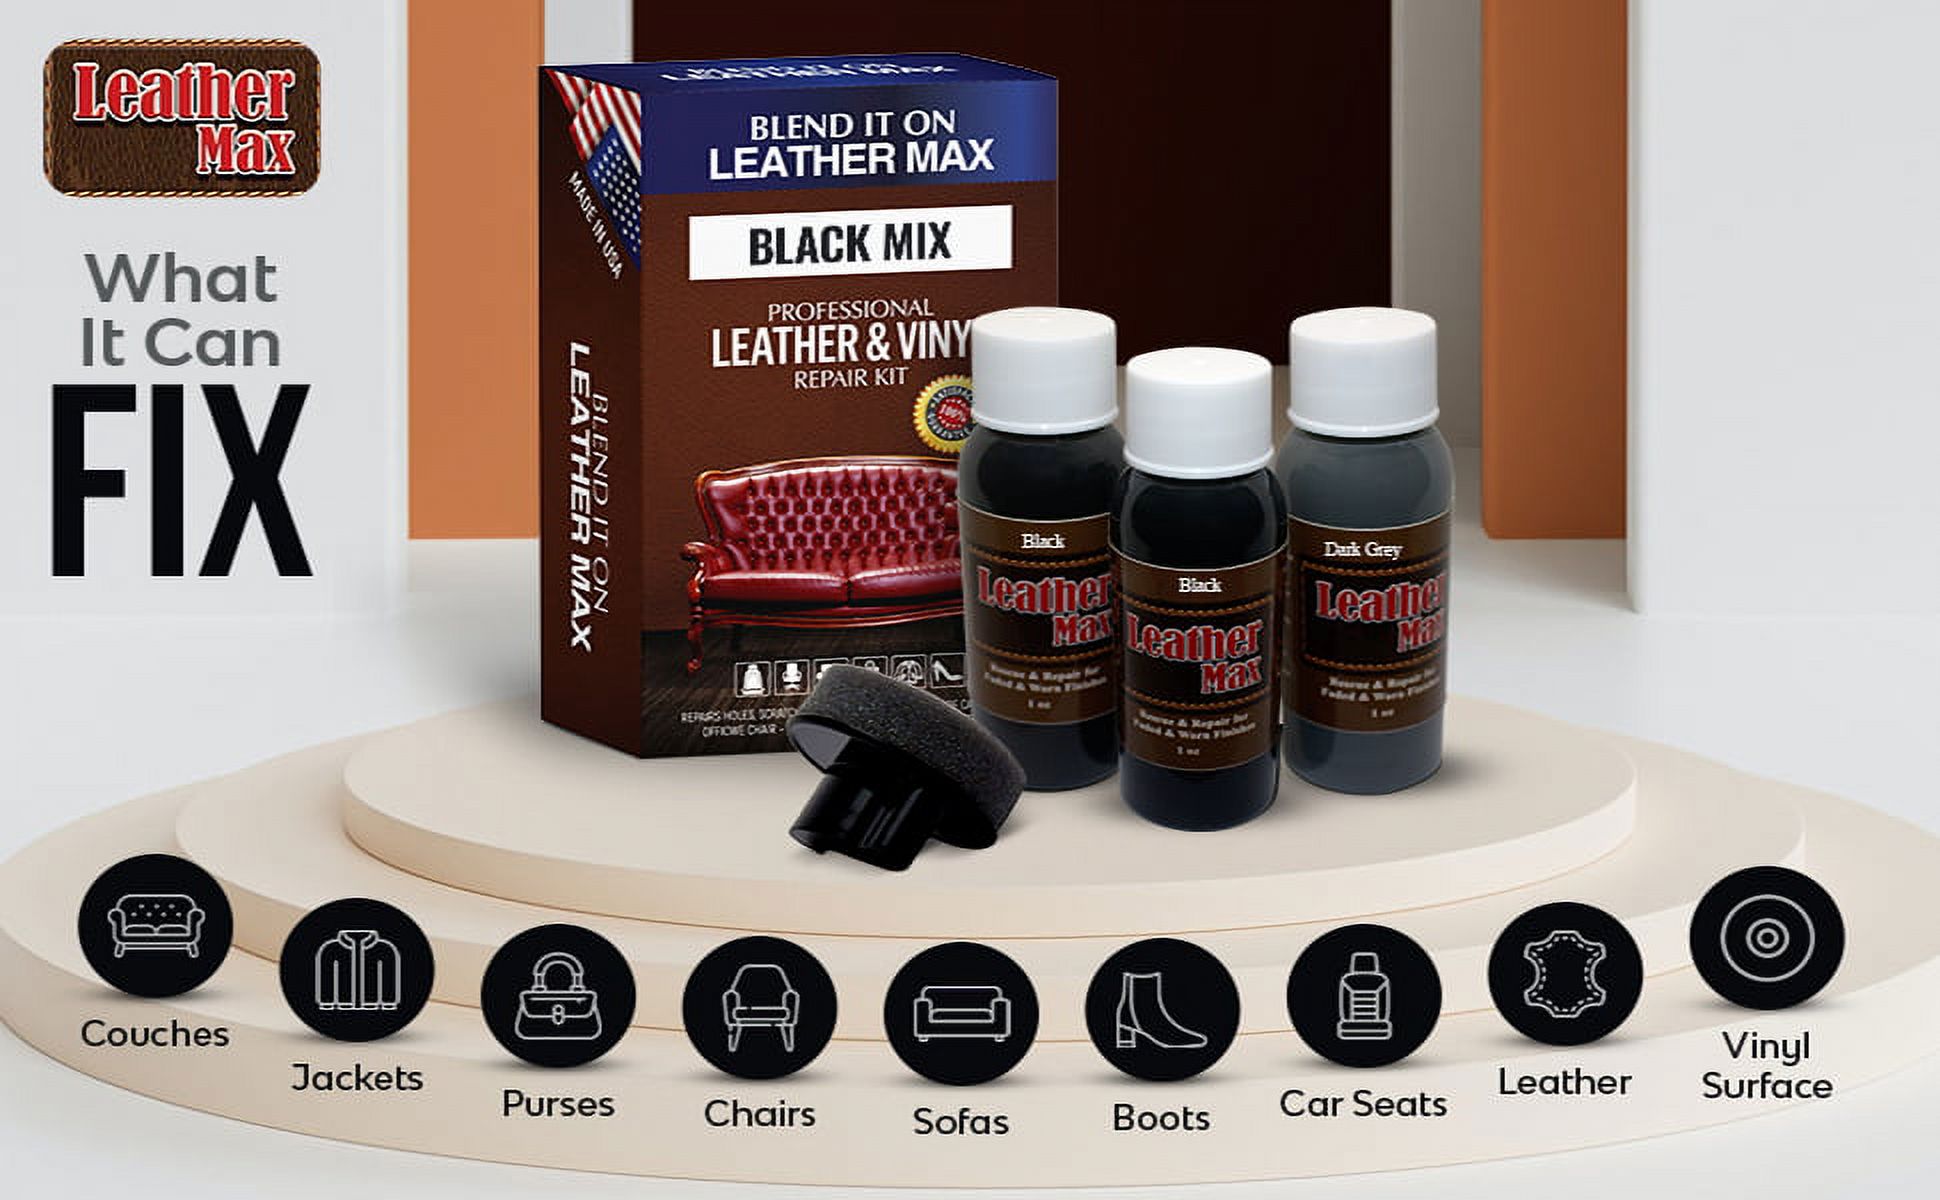 Leather Repair and Refinish for Handbags / Shoes / Boots / Jackets / Leather Max (Double Blacks) - image 5 of 5